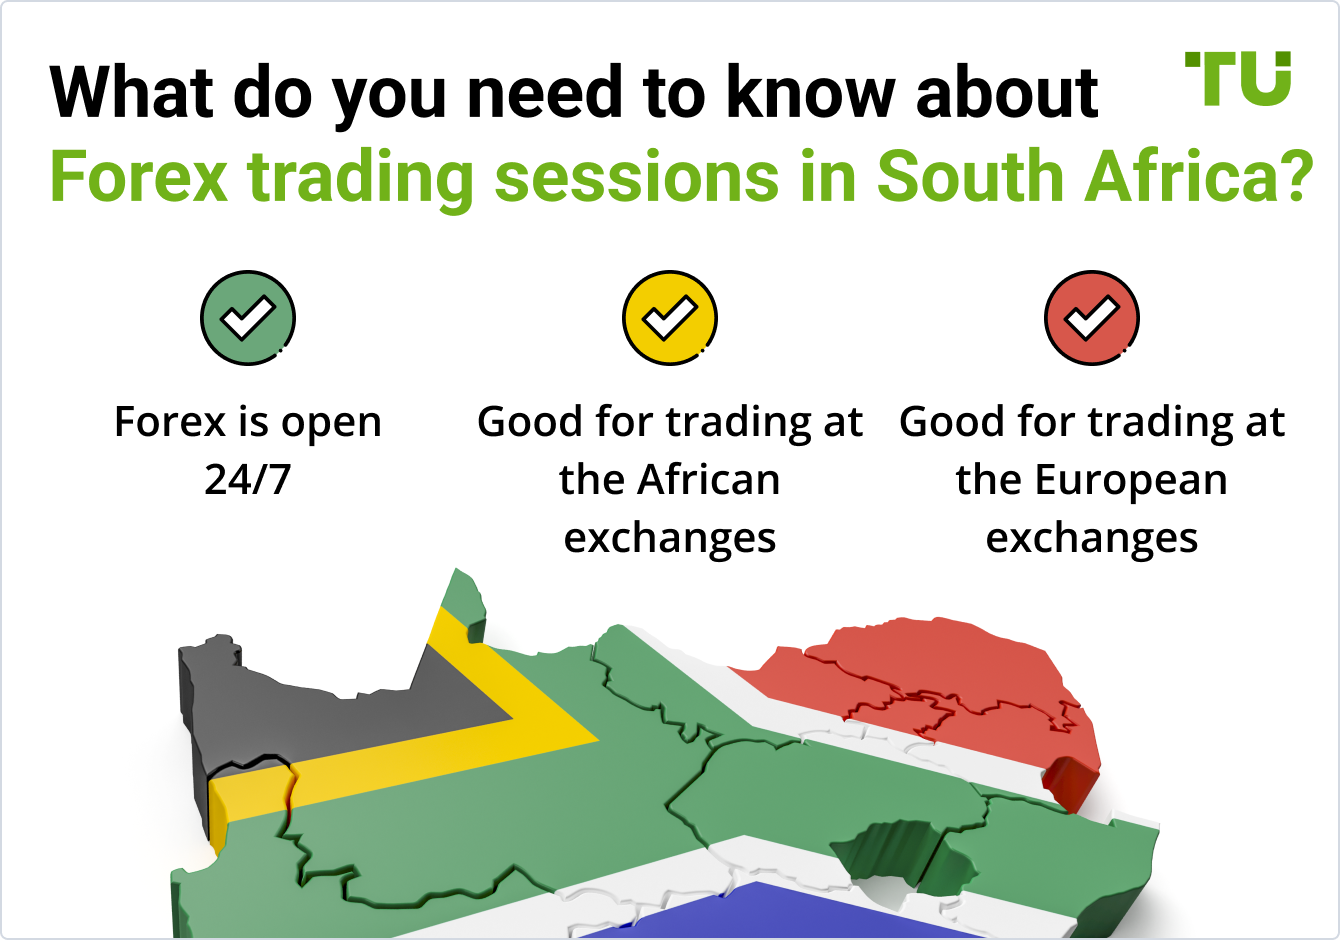 What do you need to know about 
Forex trading sessions in South Africa?